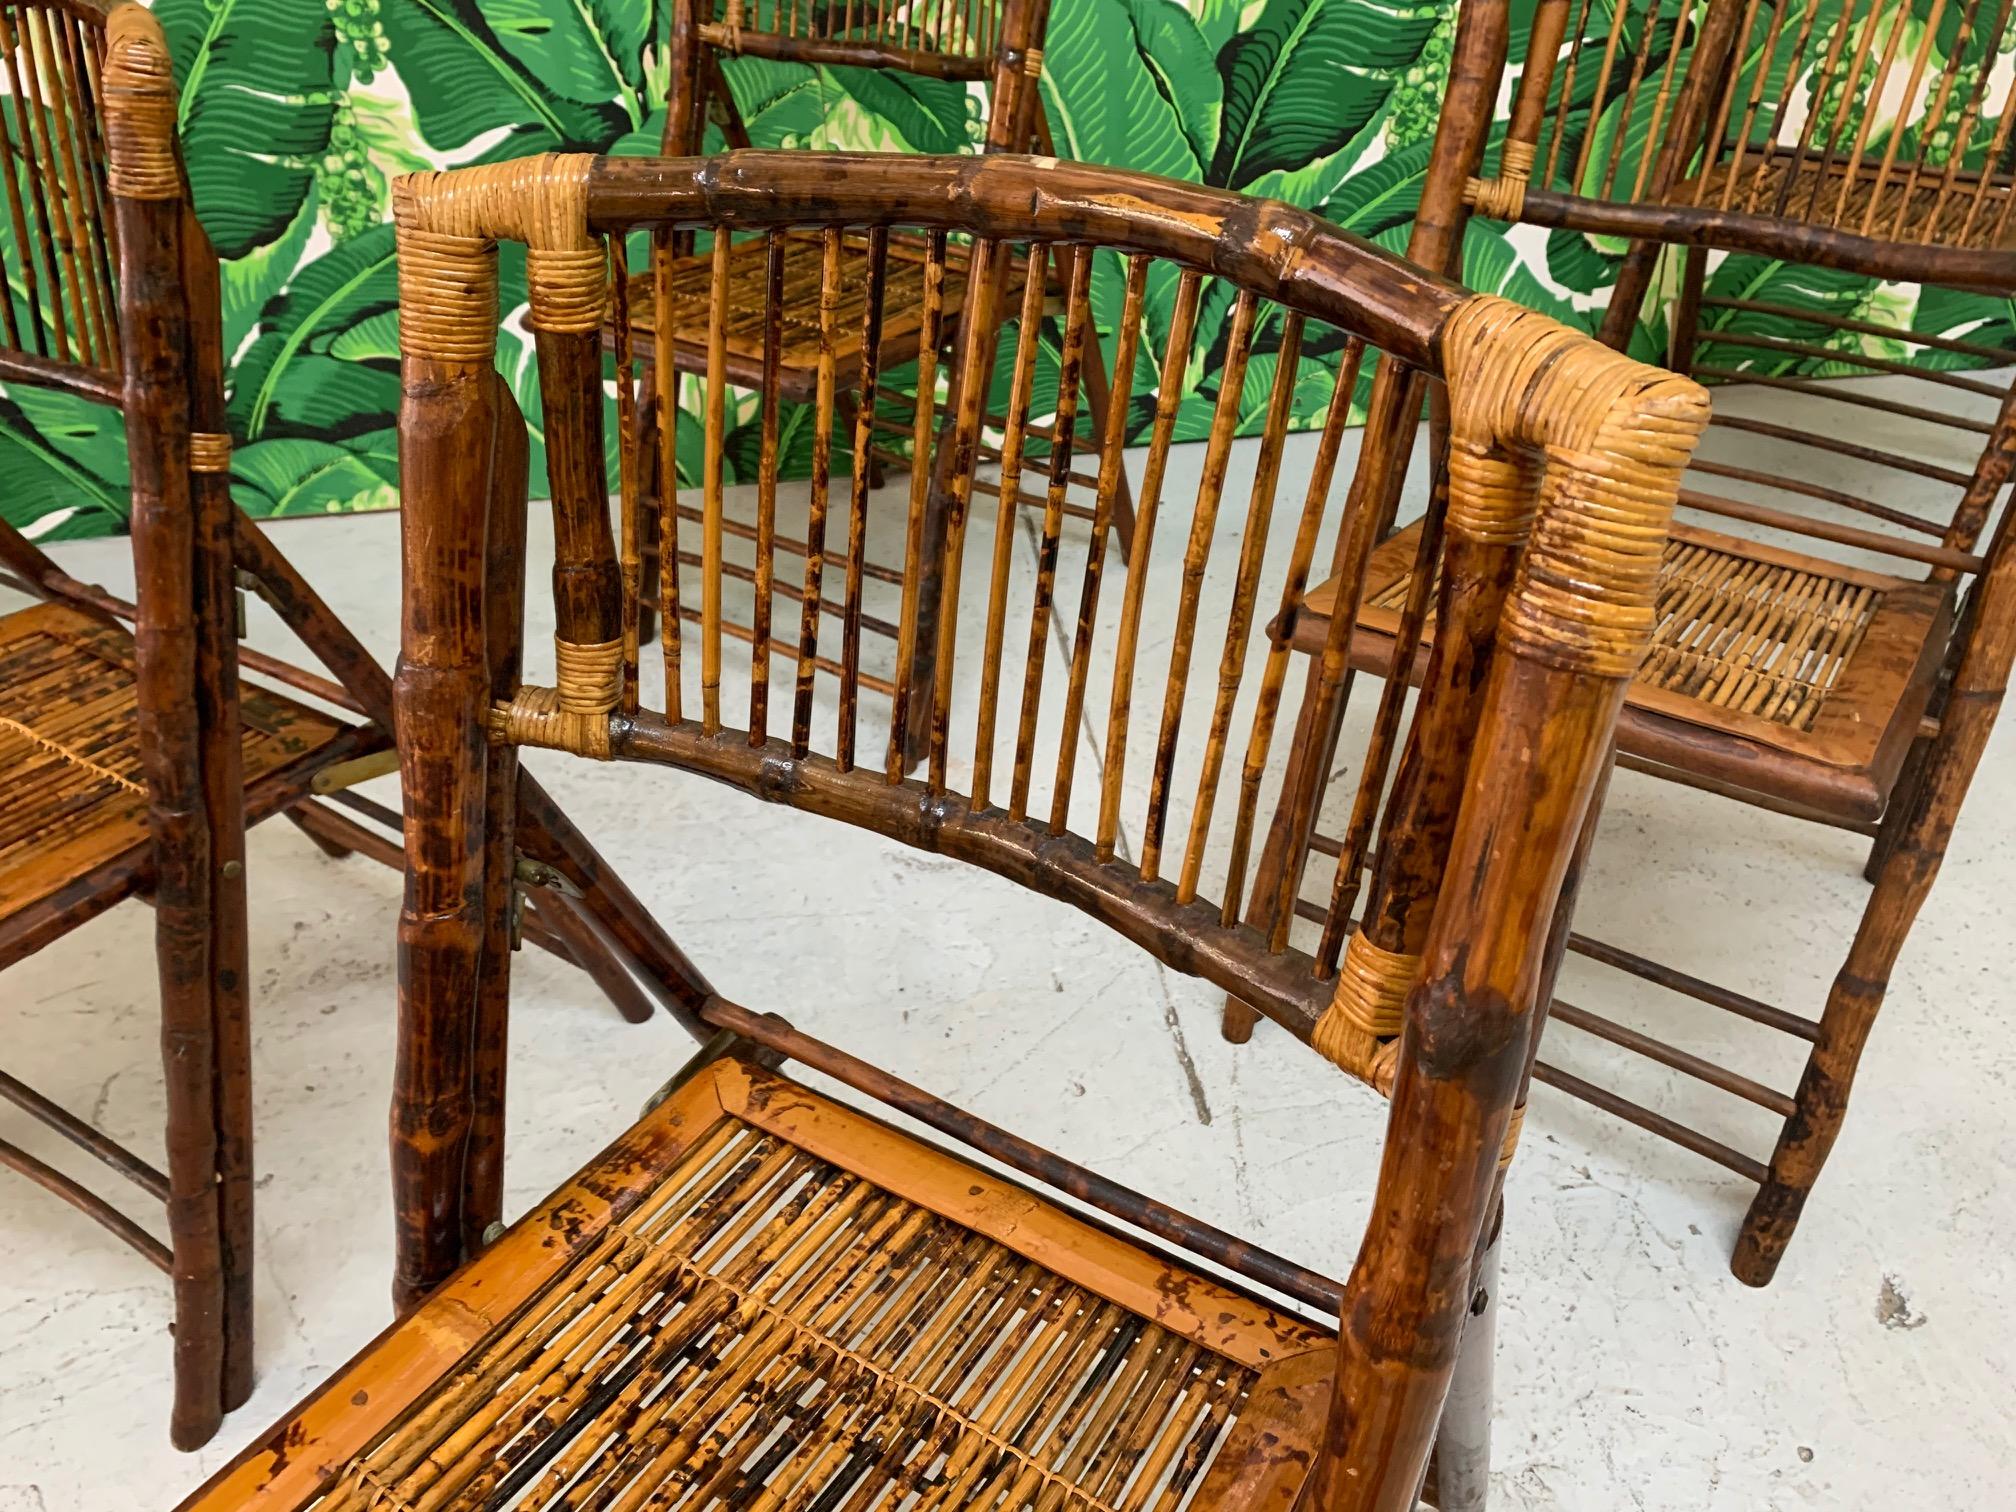 Set of 6 bamboo safari chairs feature tiger wood design and folding frame for easy storage. Perfect for a garden party or for interior use as well. Good vintage condition with minor imperfections consistent with age. Price is for the set.